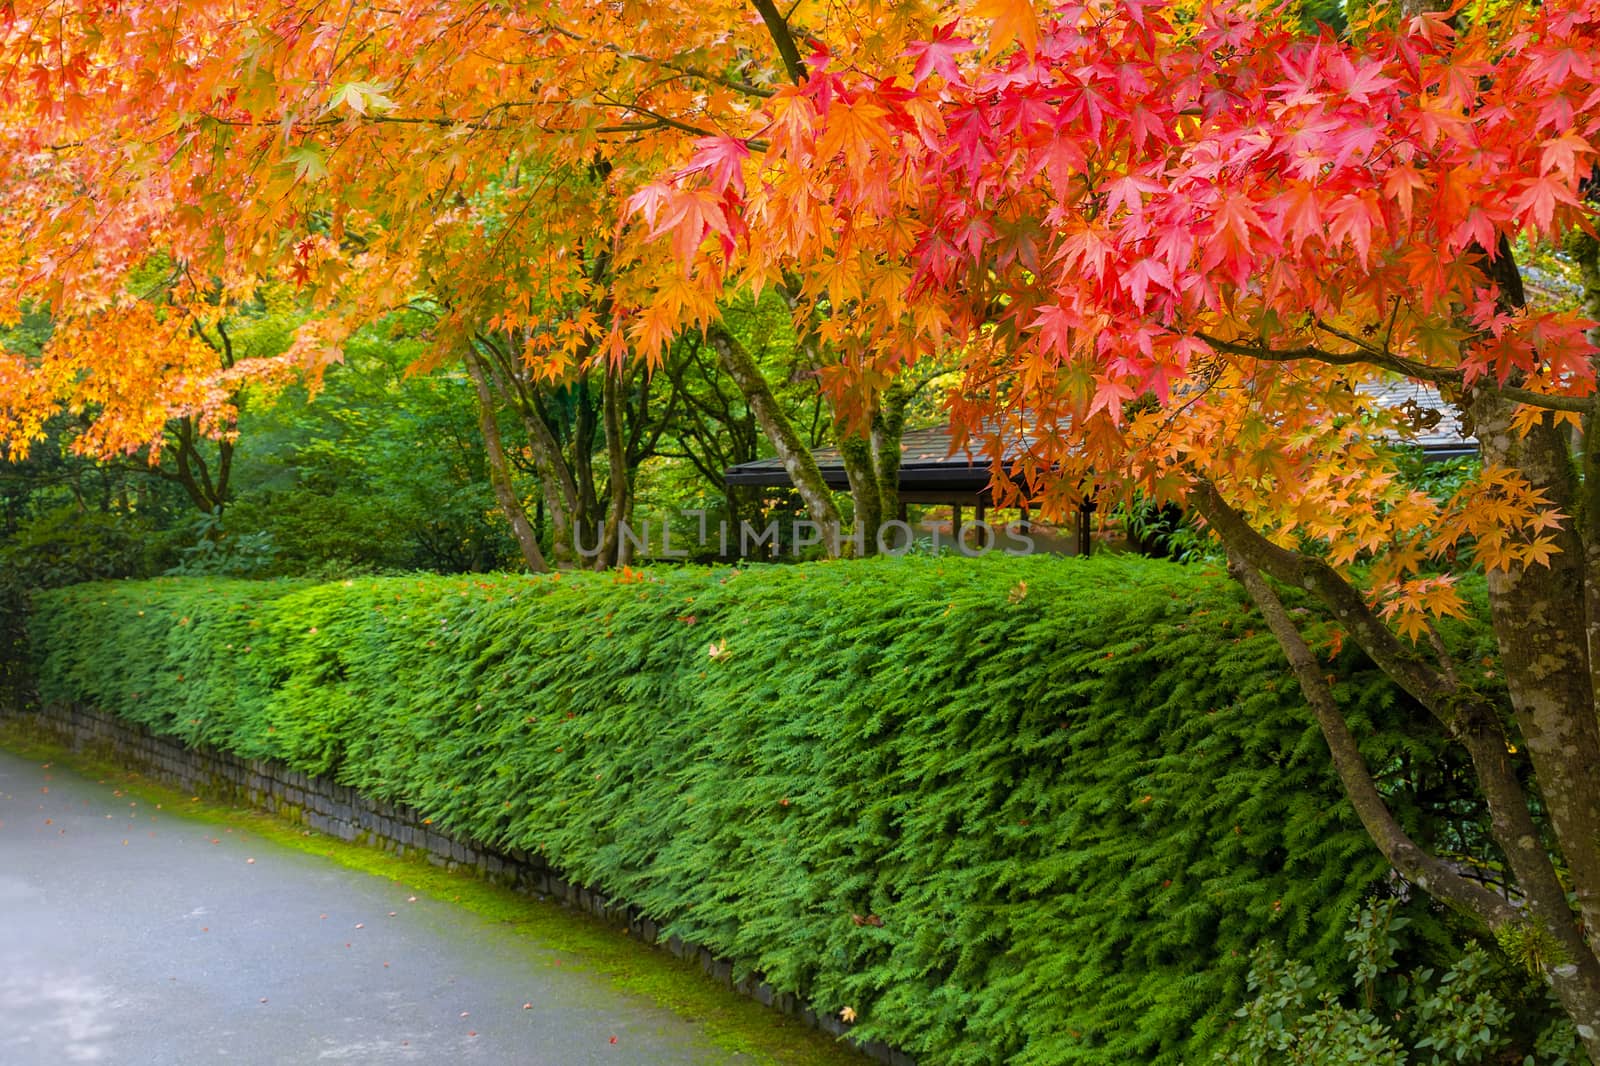 Strolling path in Japanese Garden lined with maple trees in fall season colors